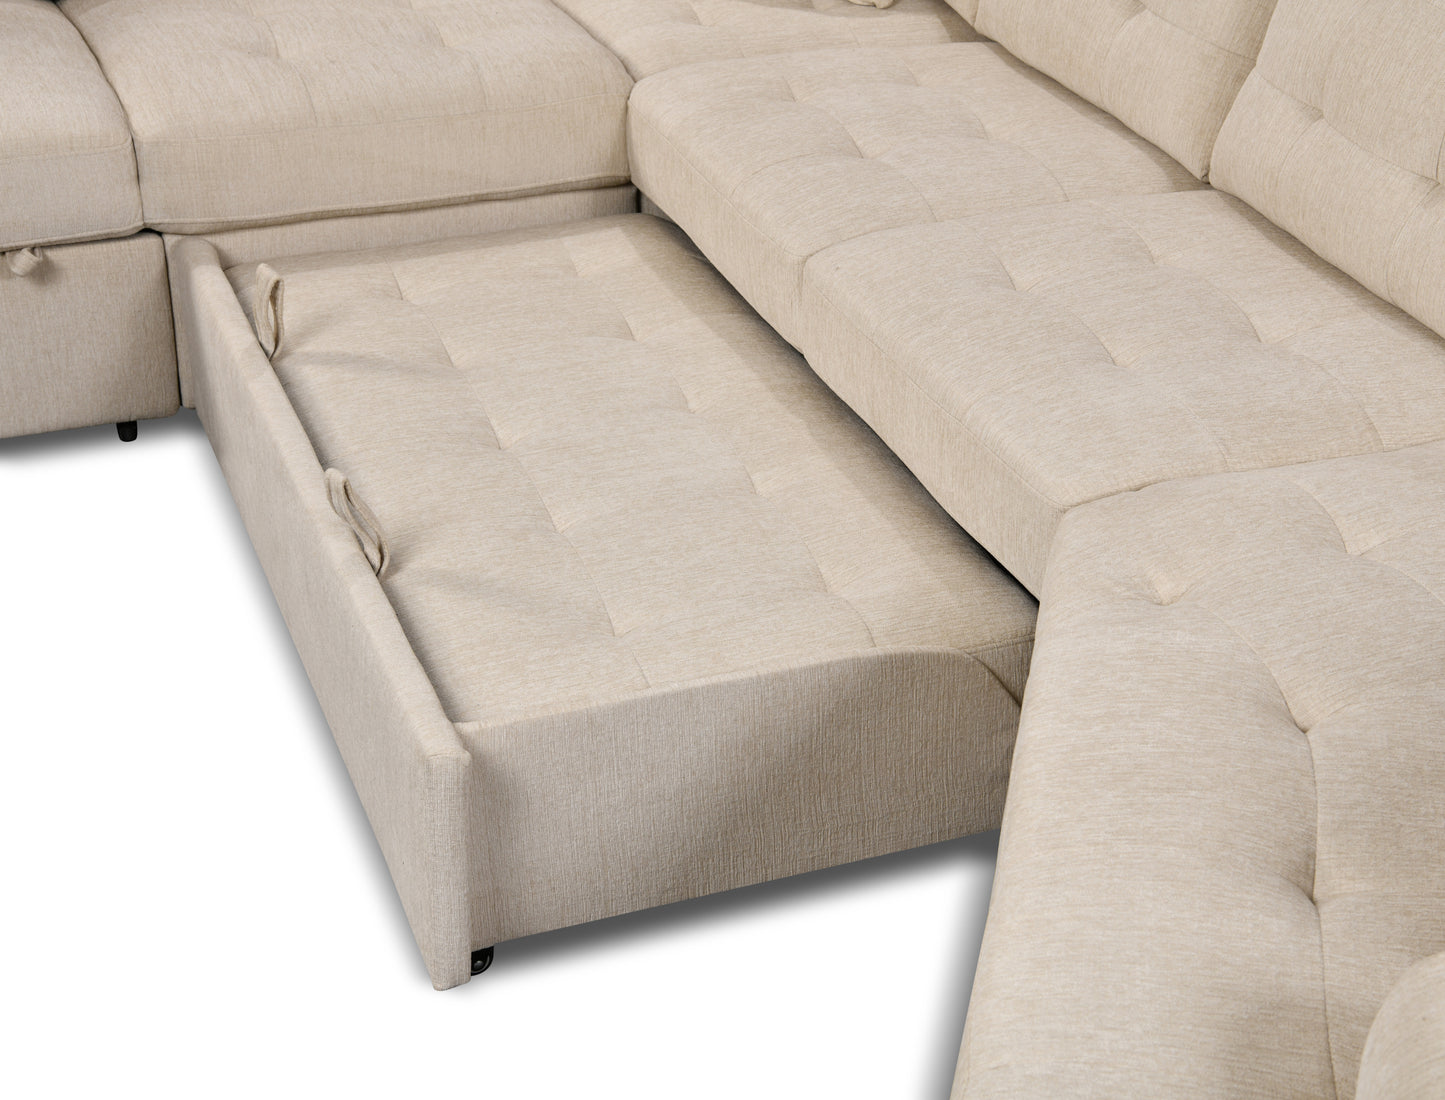 U-Shape Sectional, Wide Chaise, Beige Couch